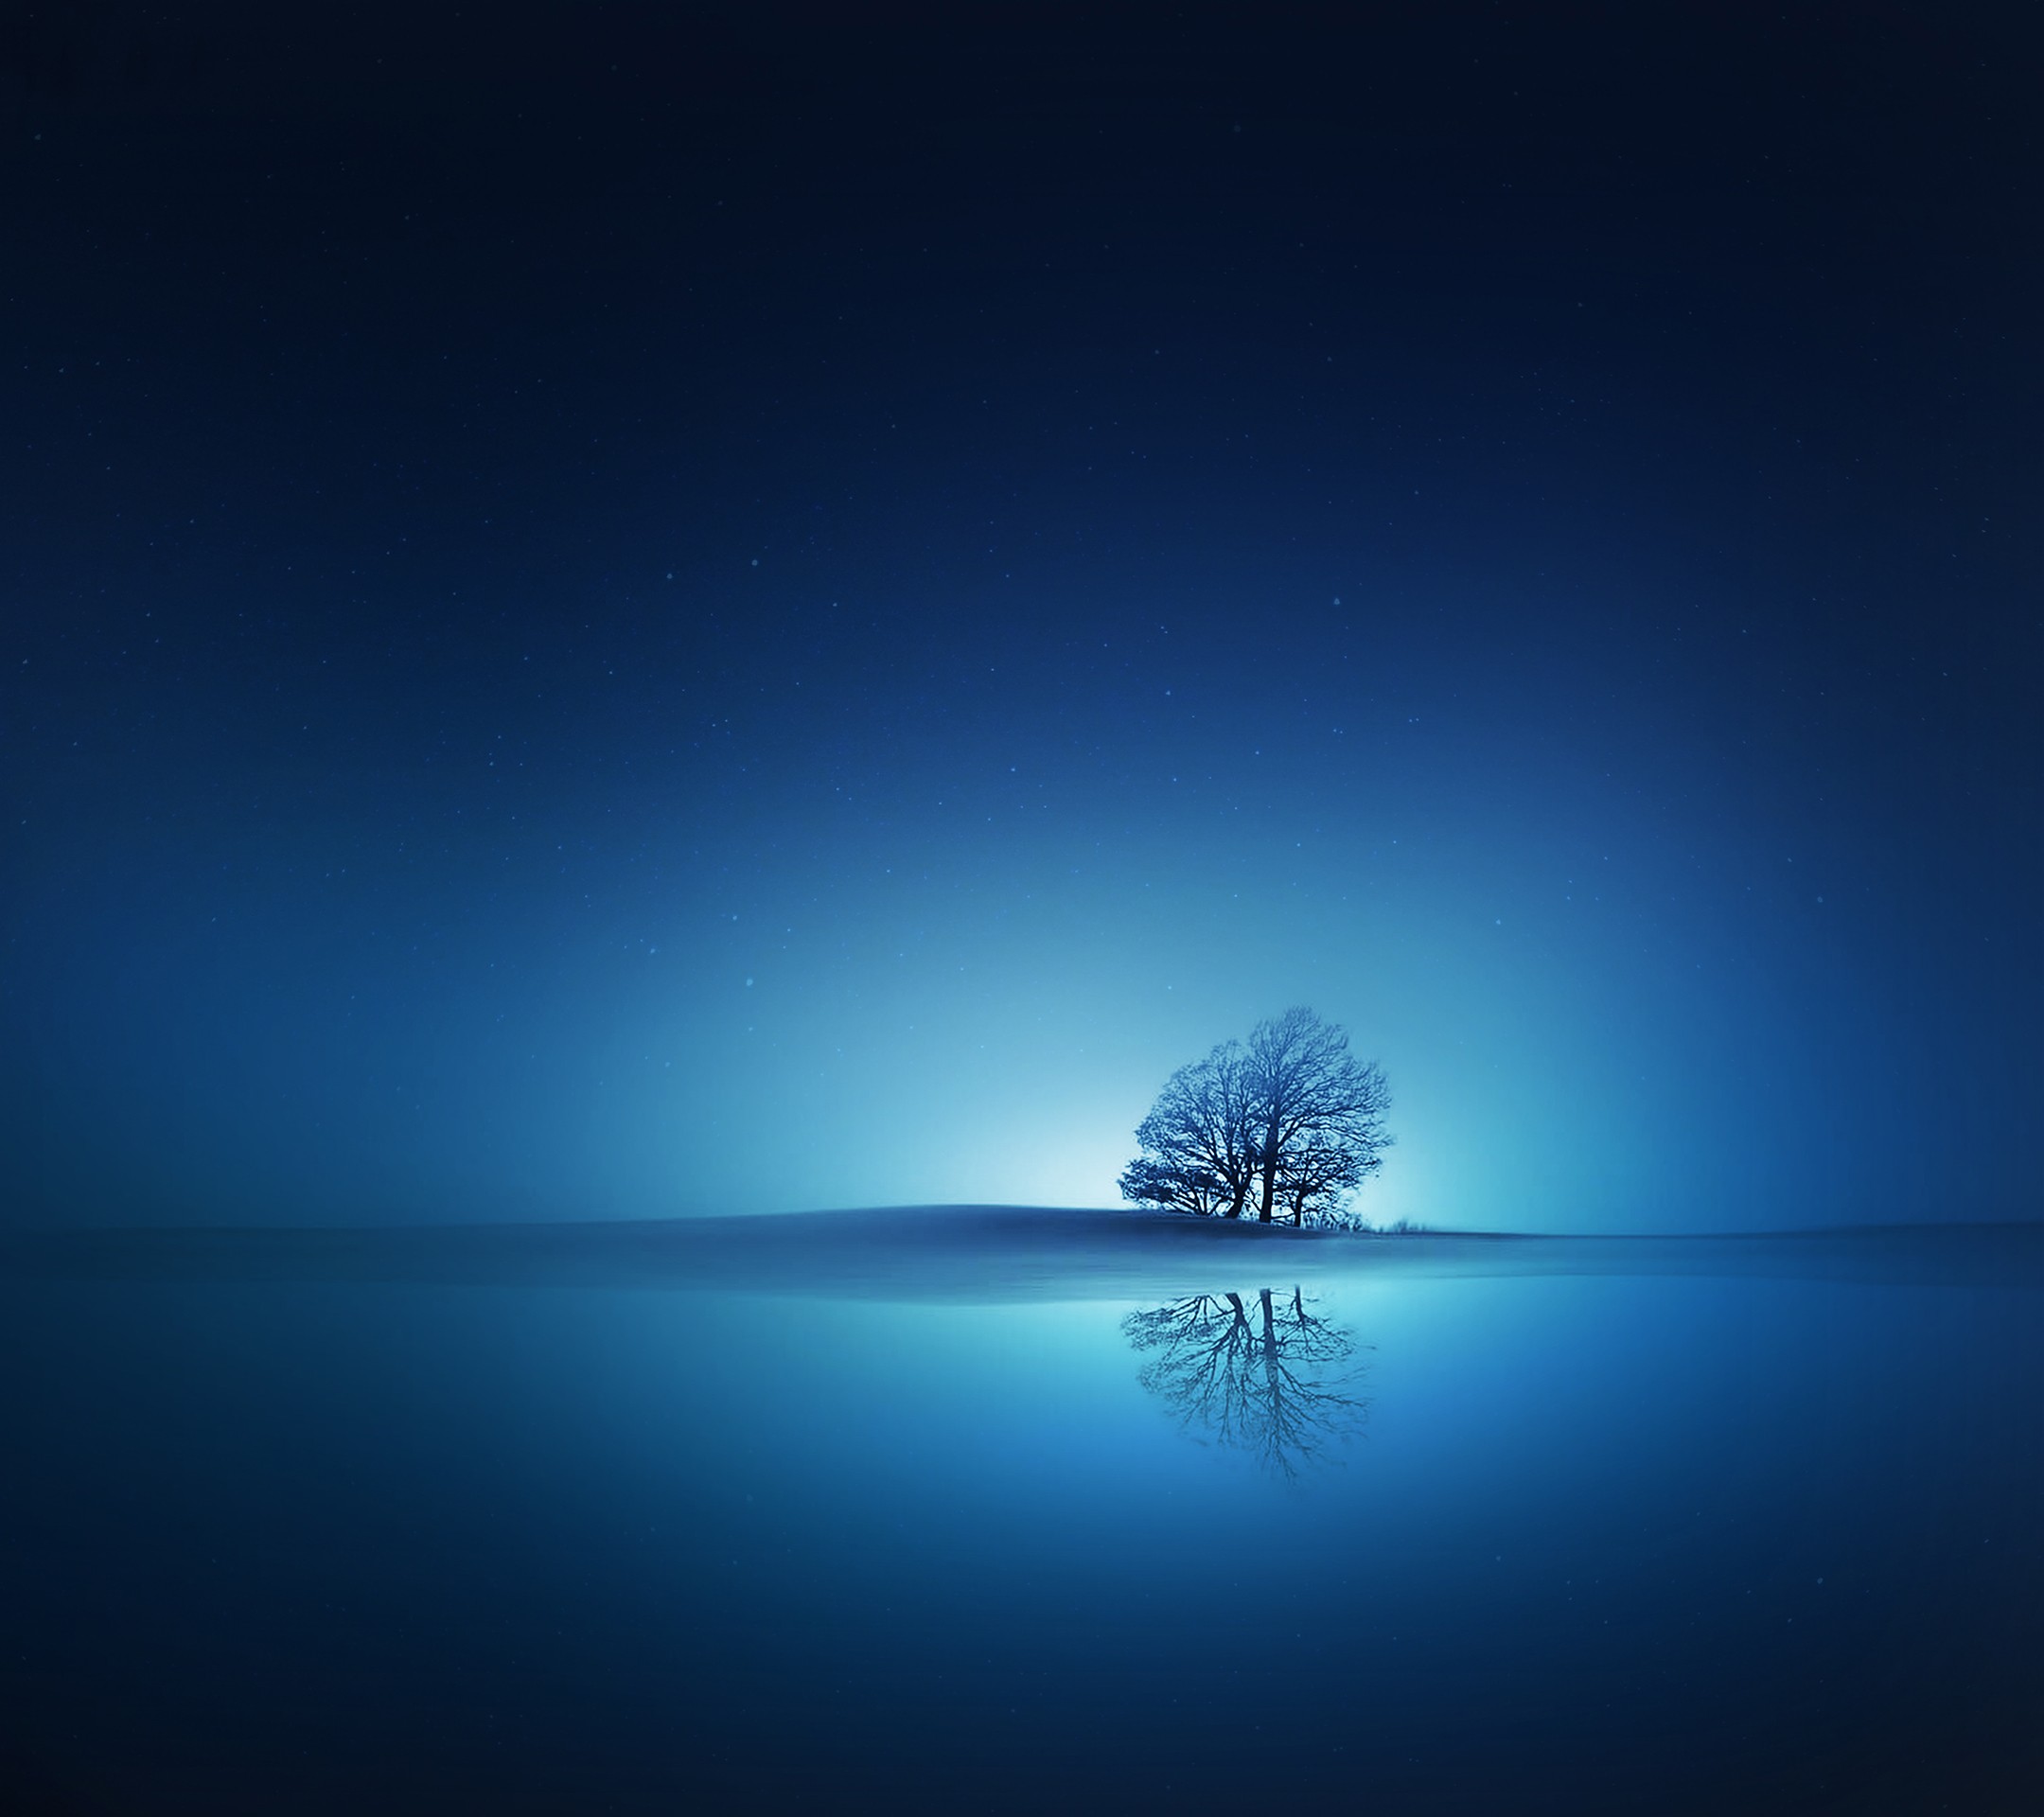 General 2160x1920 blue night sky water reflection trees outdoors sky